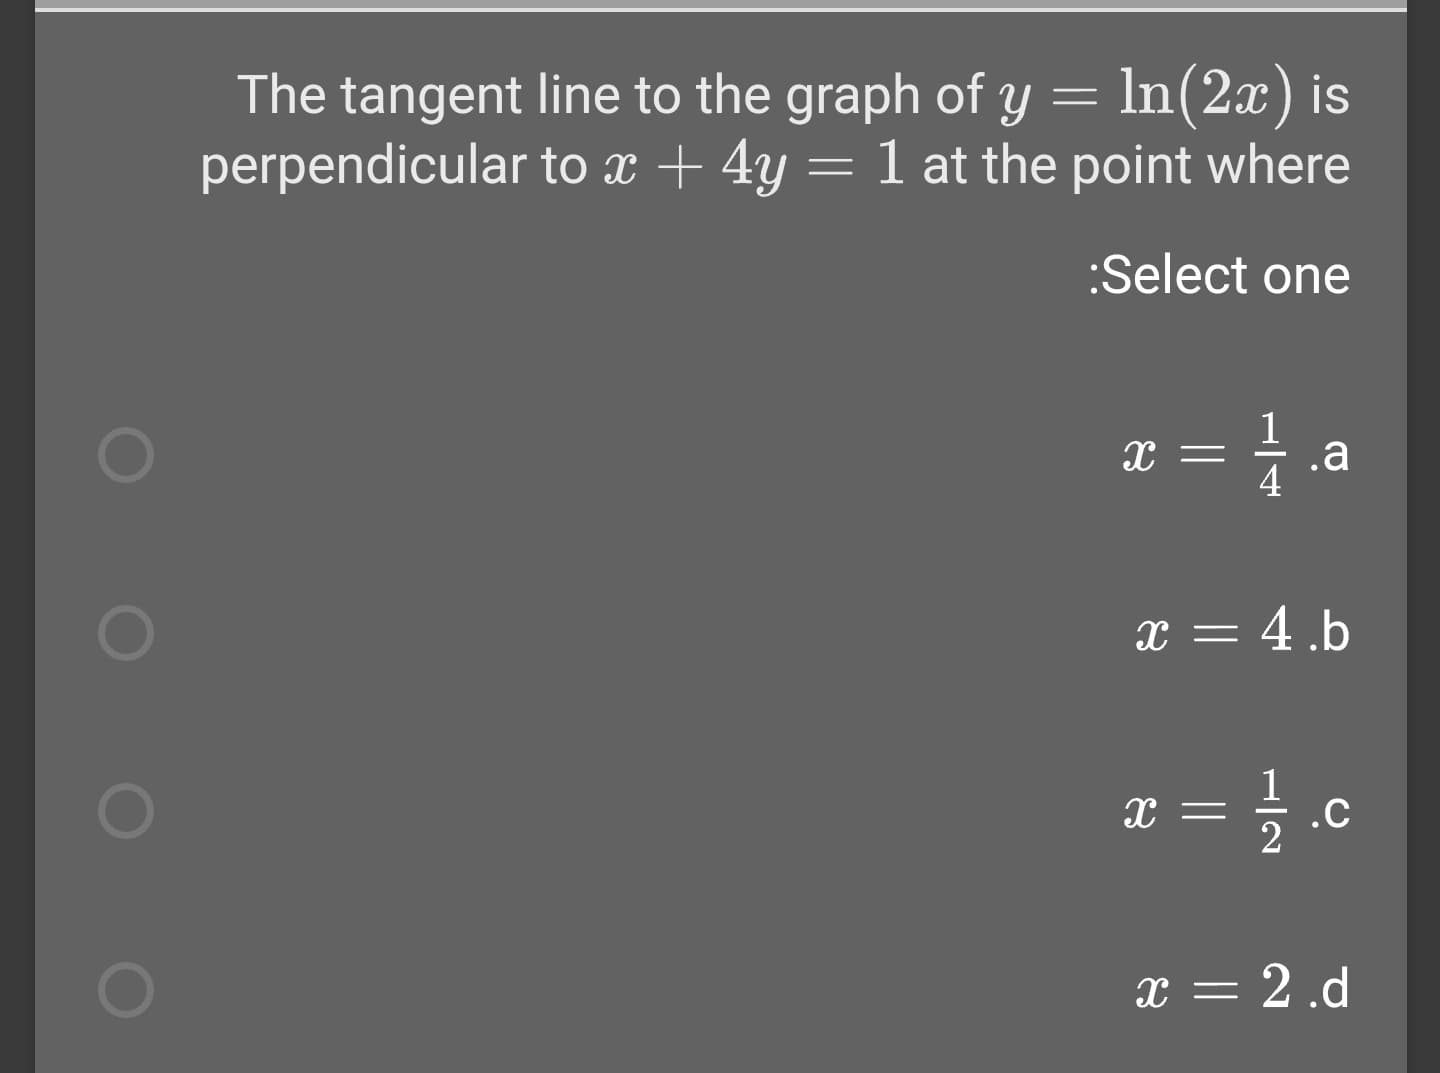 The tangent line to the graph of y = In(2x) is
perpendicular to x + 4y = 1 at the point where
:Select one
.a
4
x = 4.b
.C
x = 2 .d
